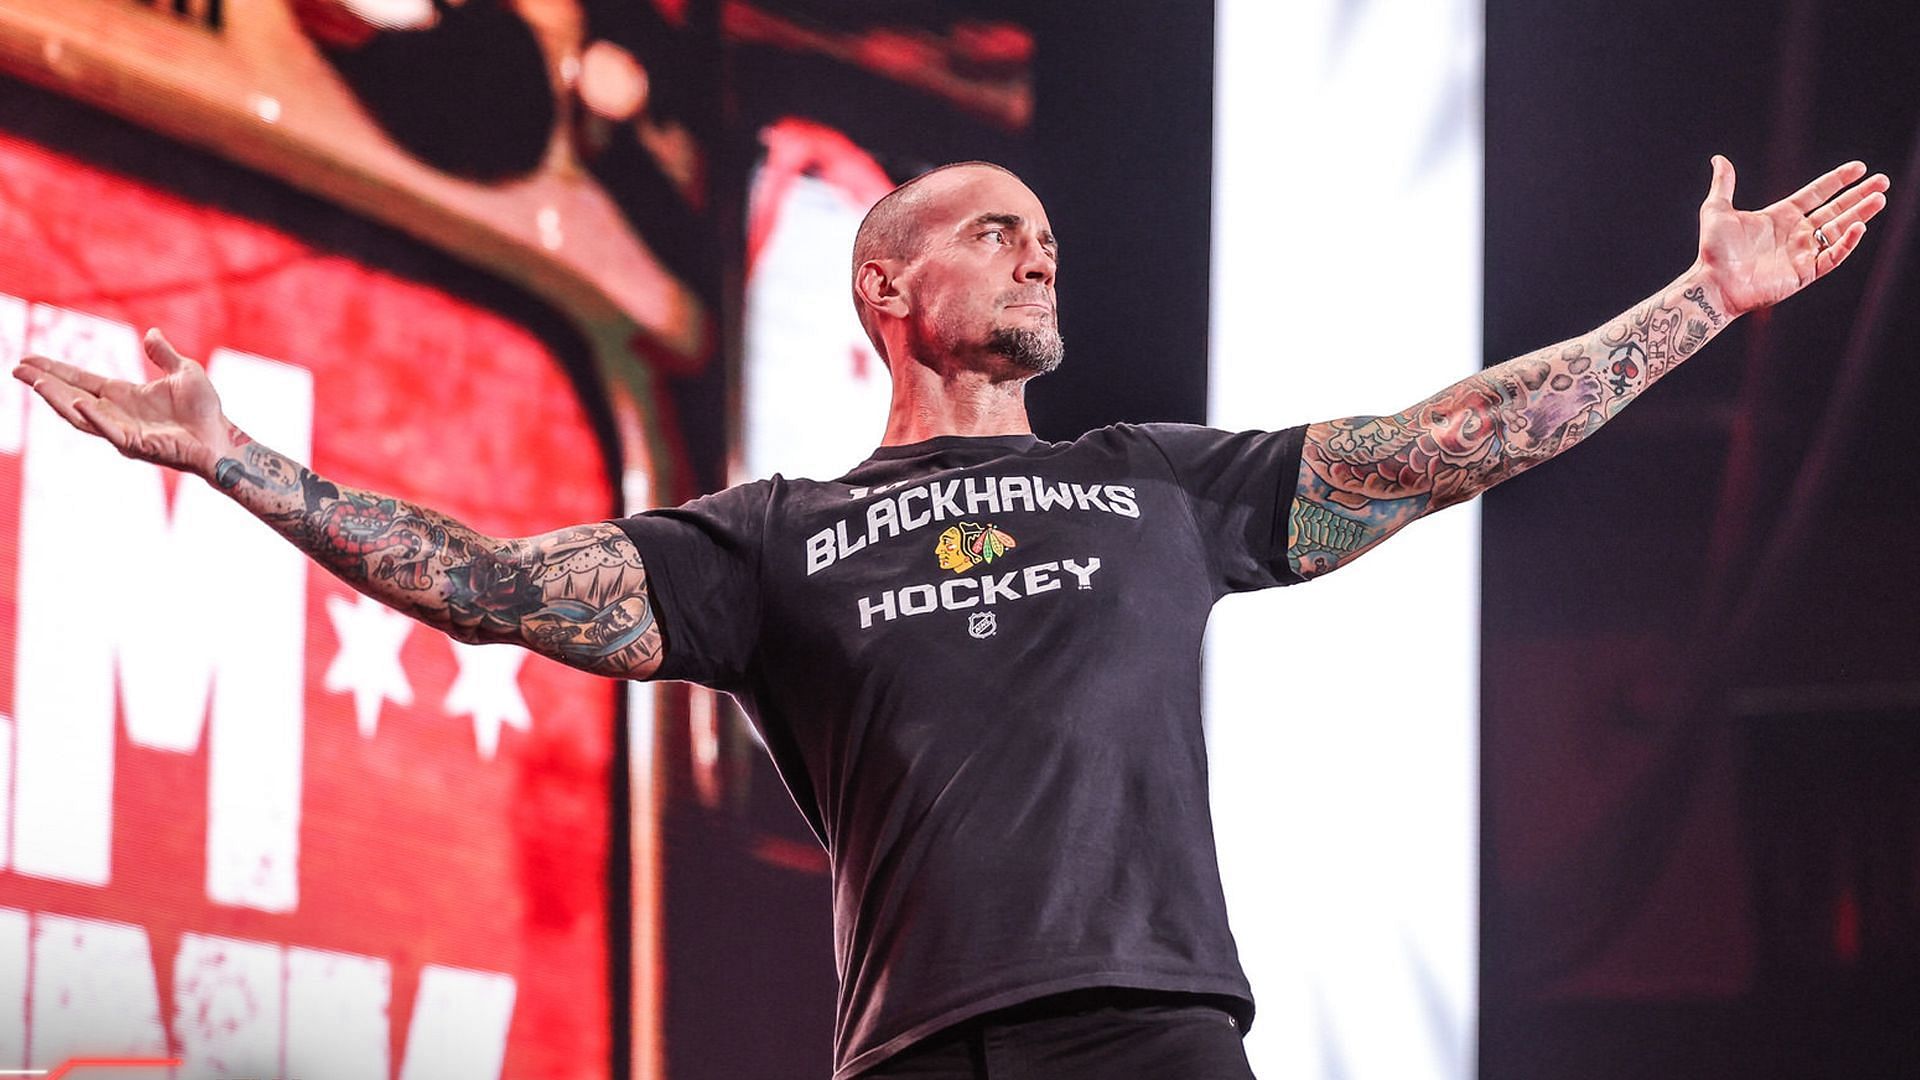 CM Punk makes his entrance on AEW Collision (image credit: All Elite Wrestling)